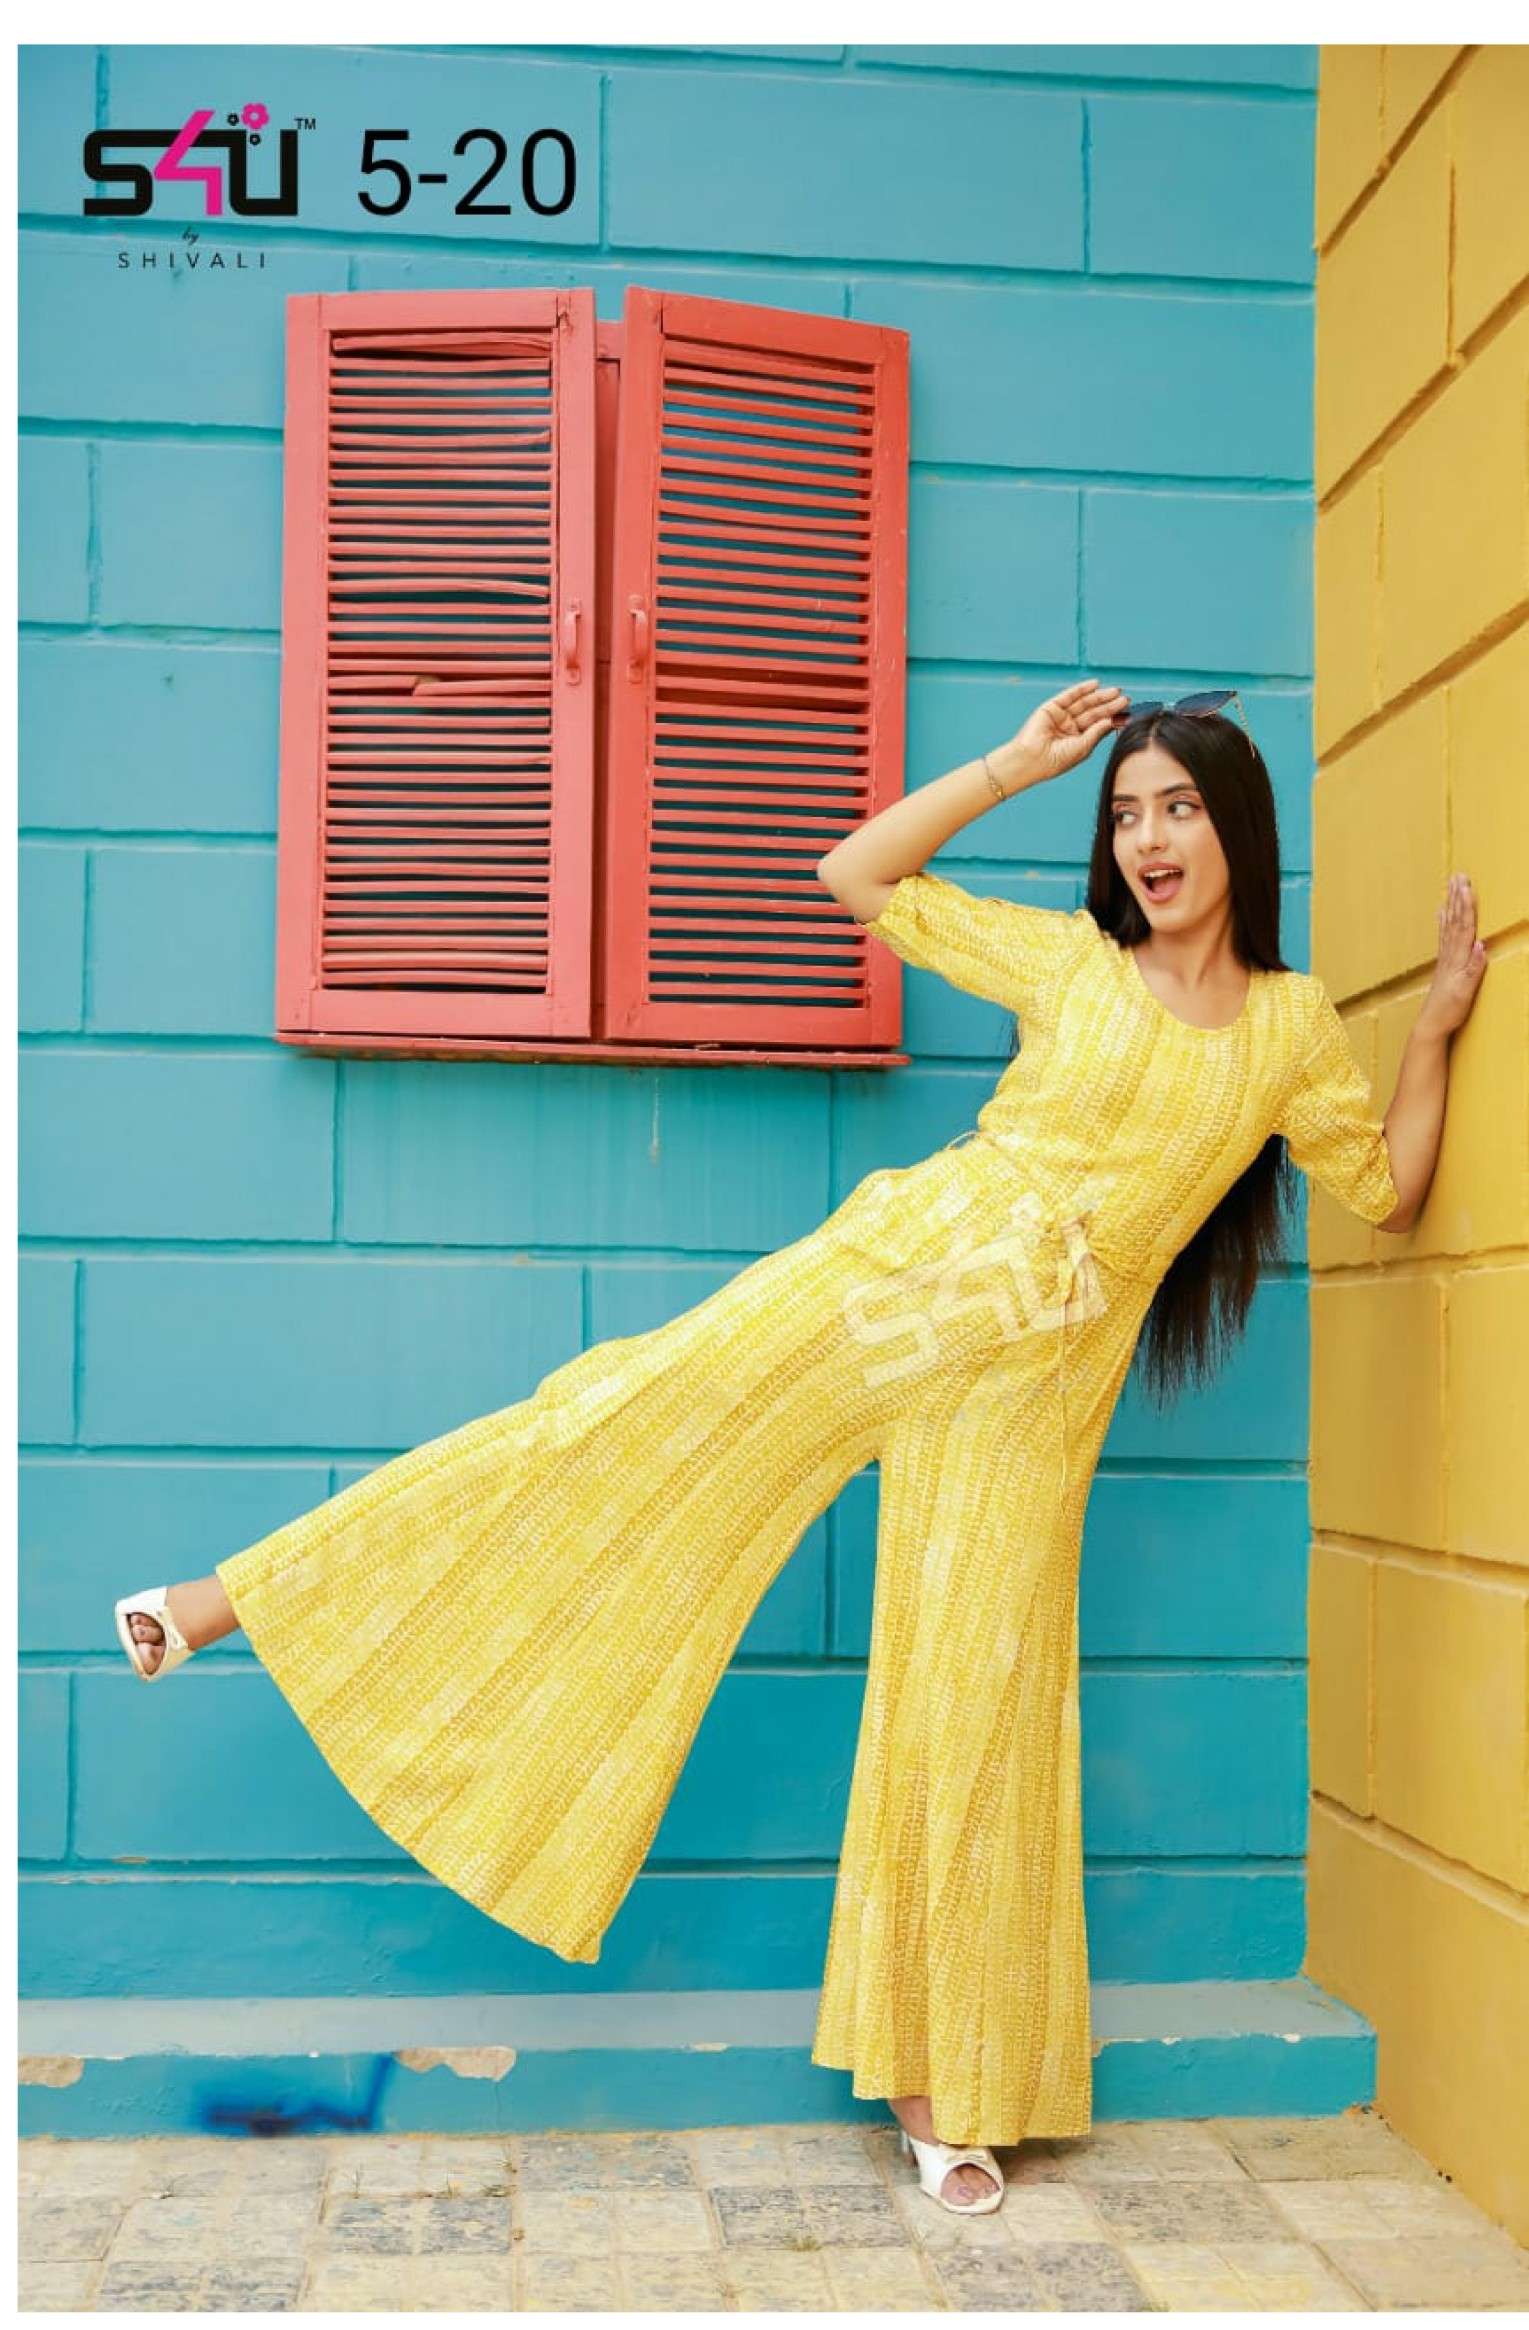 S4u 5-20 Fancy Readymade Yellow Colour Suits collection at b...